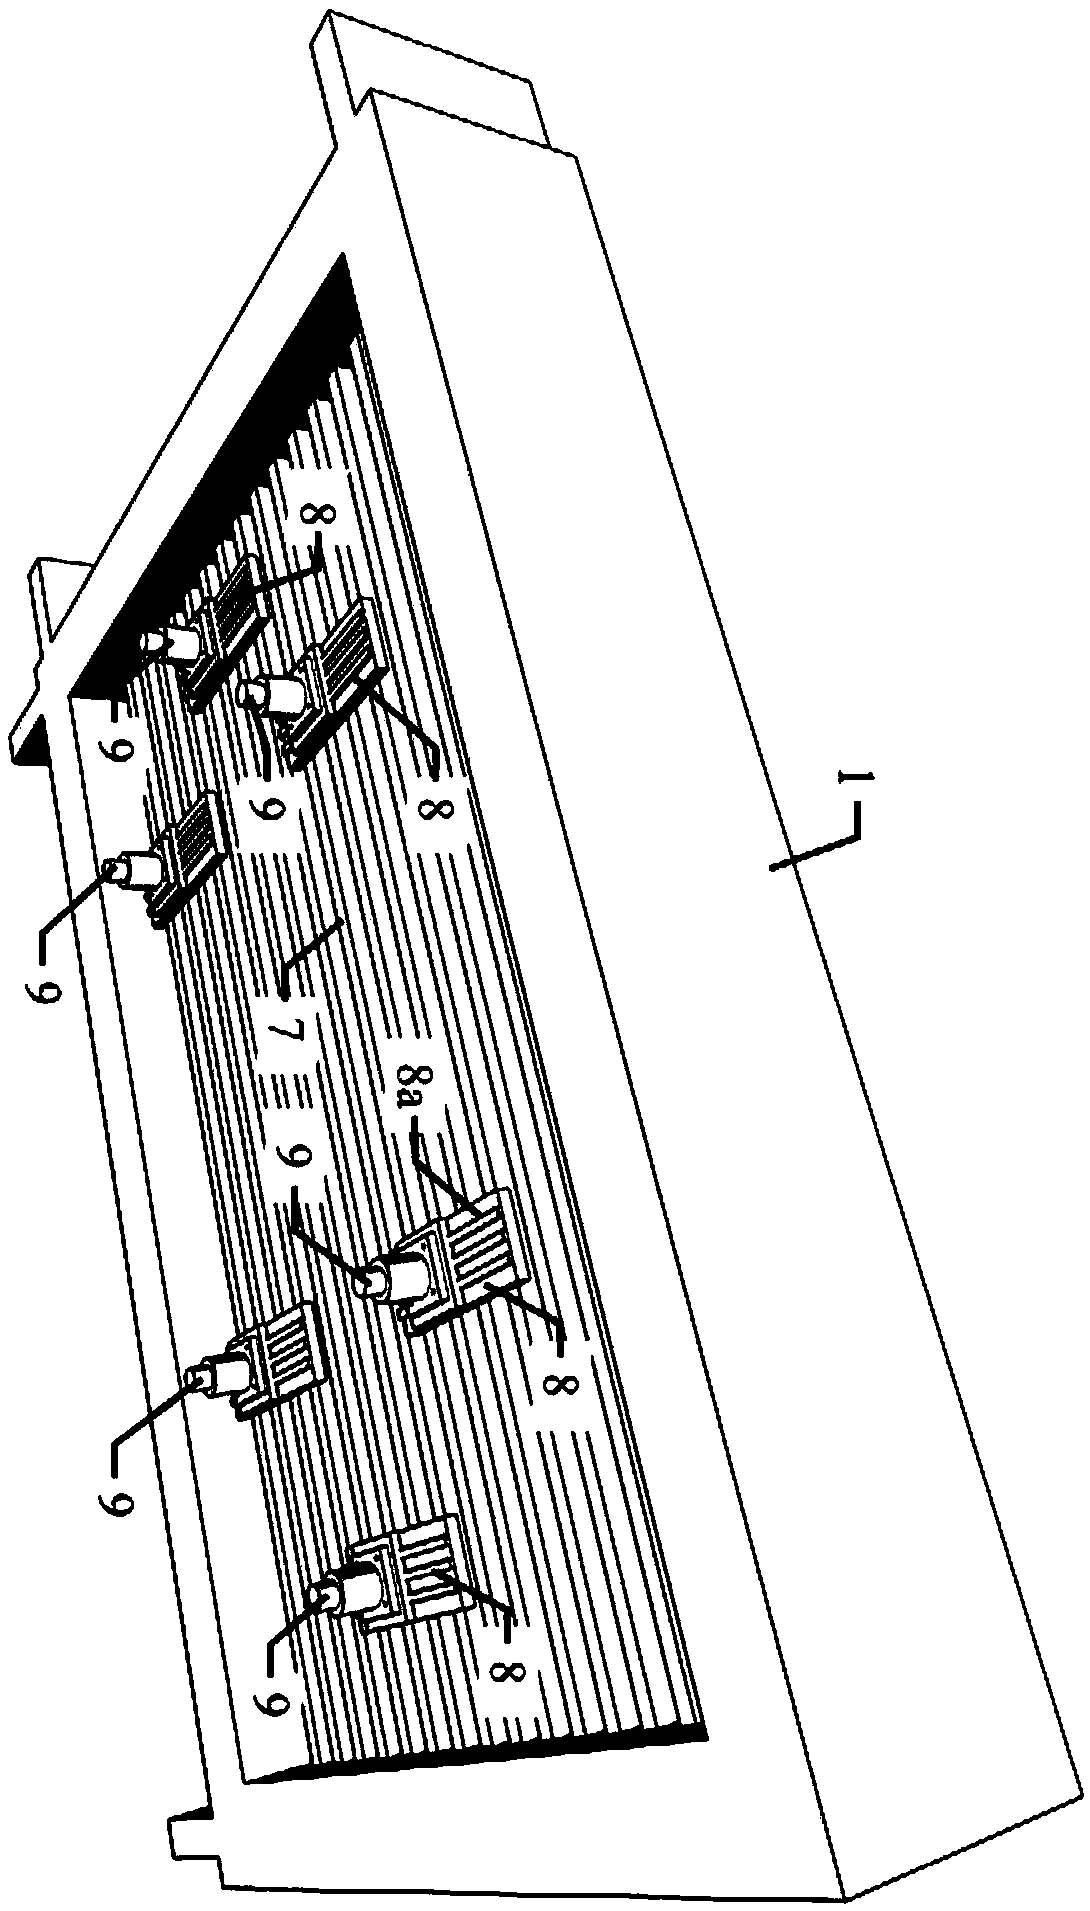 Multifunctional structure test loading system incorporating loading tonnage and loading accuracy